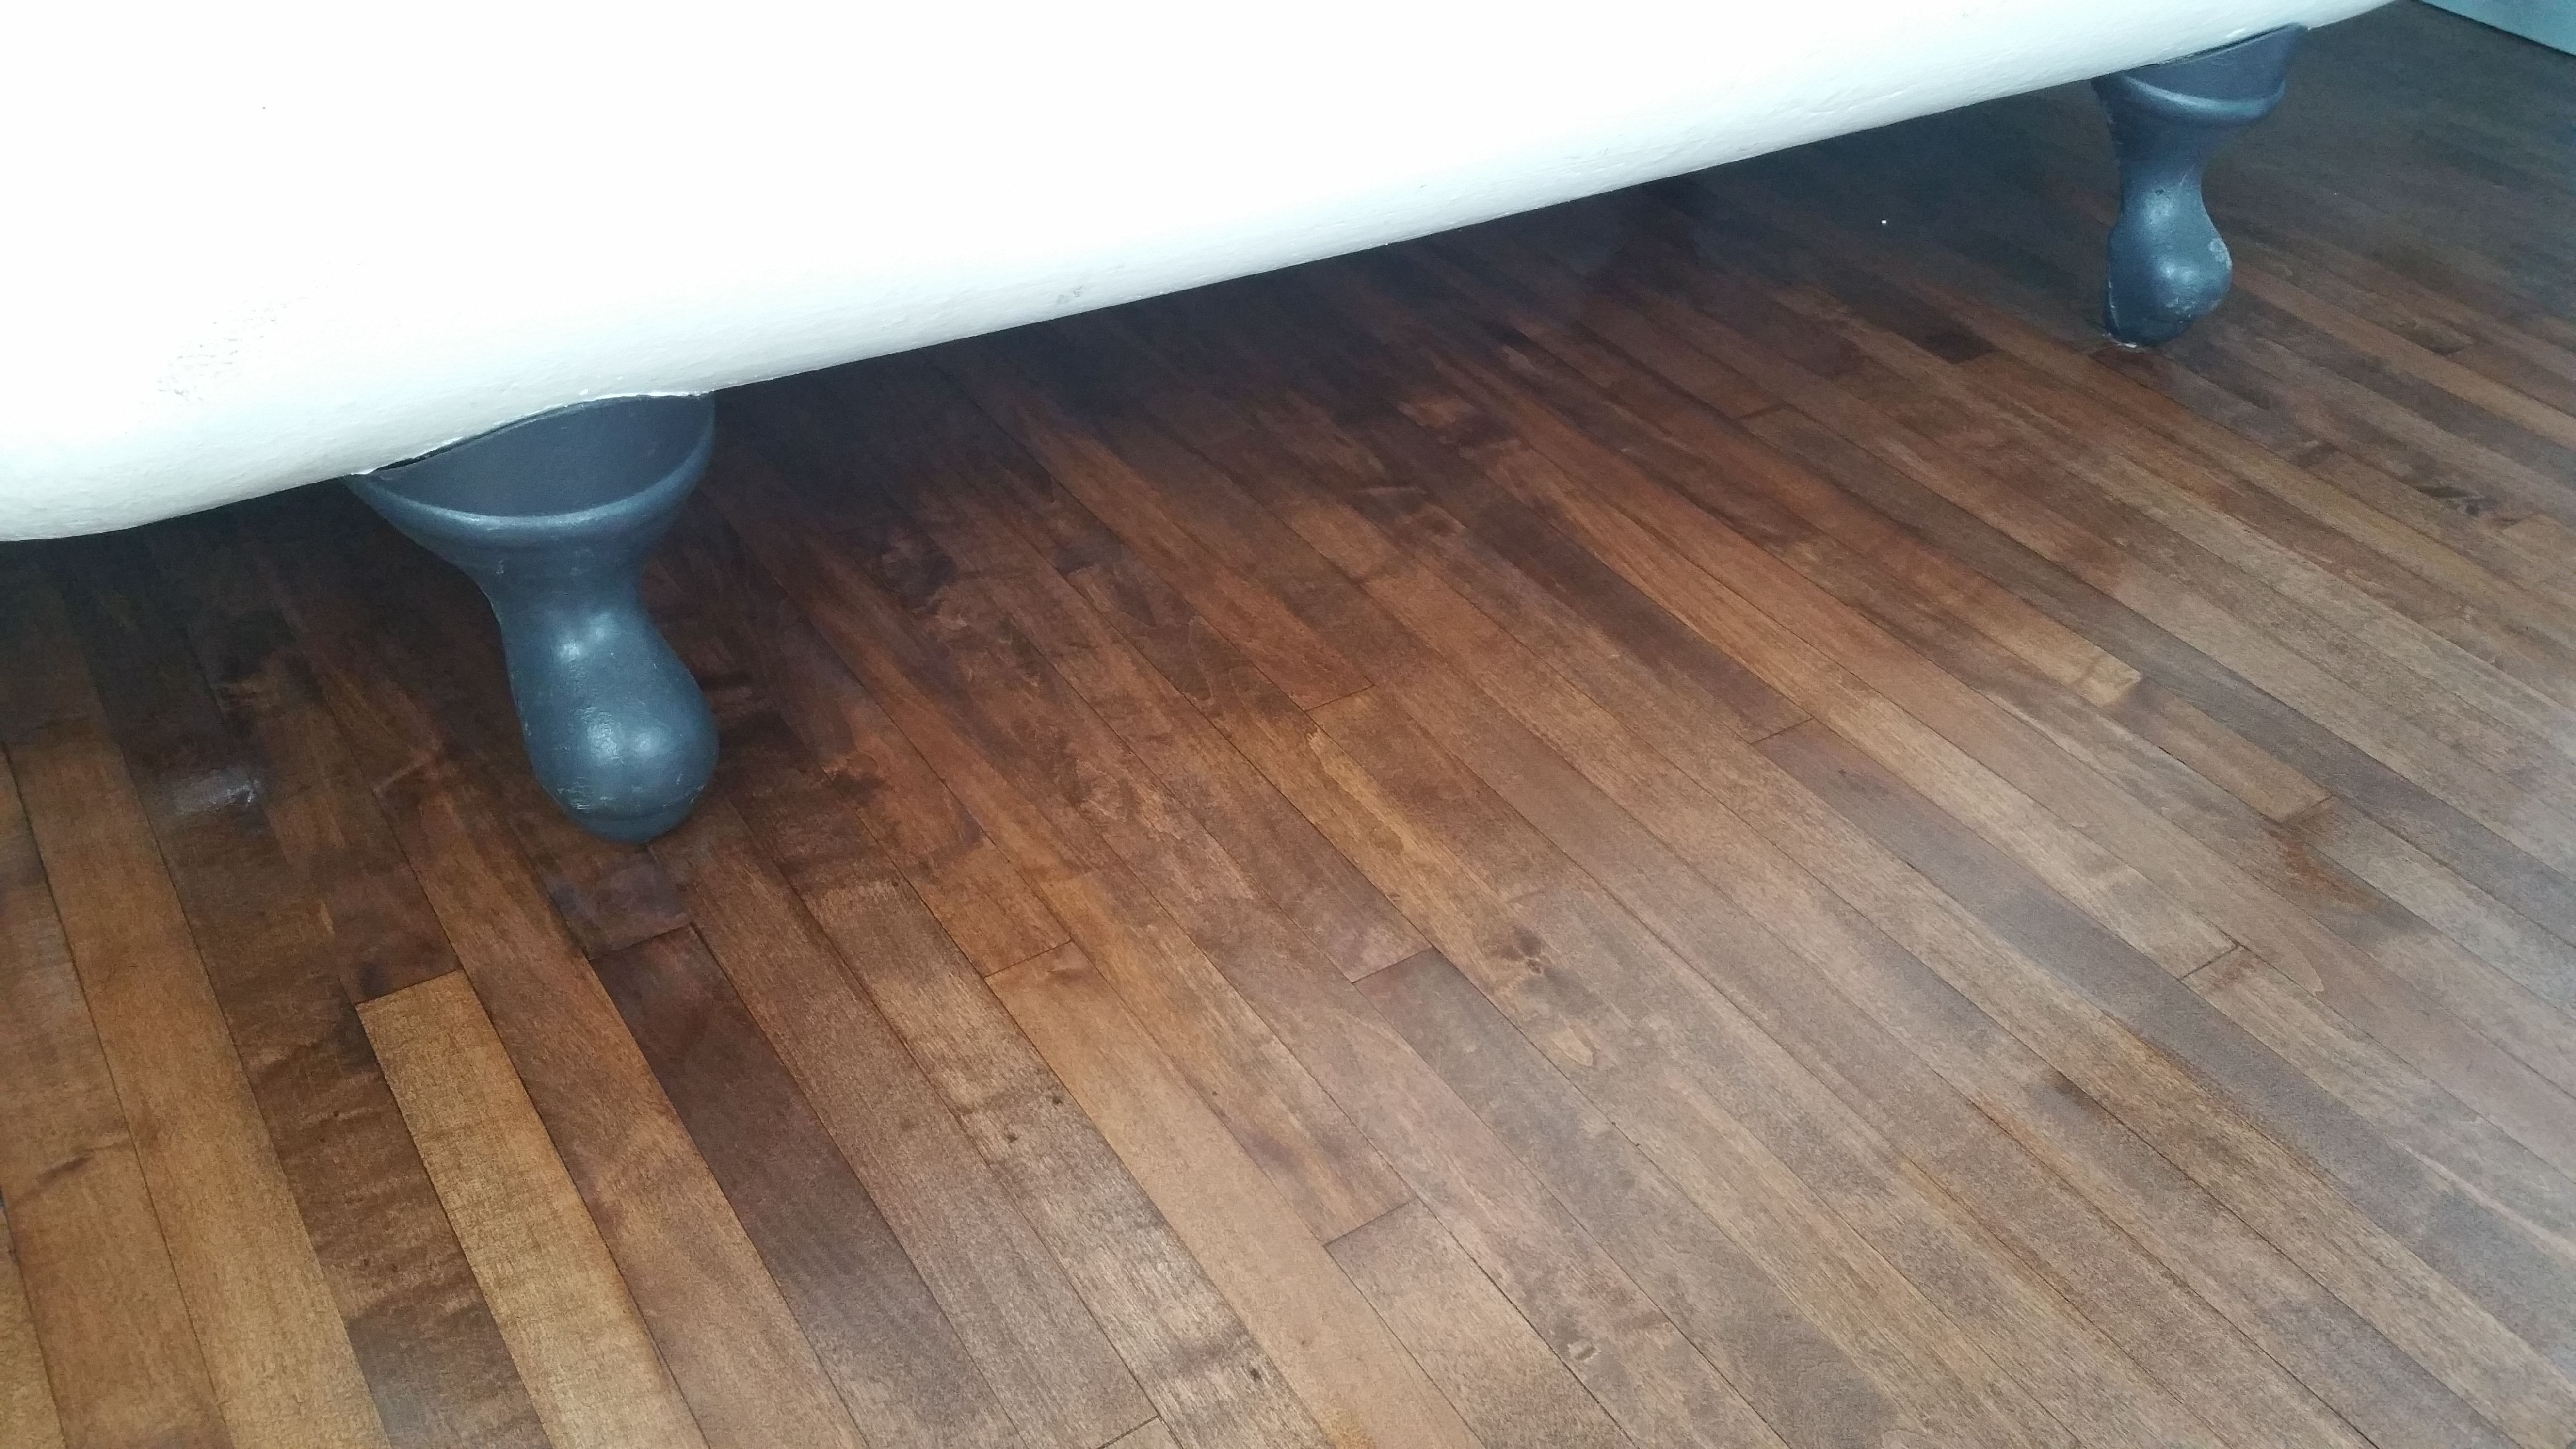 Cheap Hardwood Flooring Calgary Of 1 1 2 Maple In A 100 Year Old Calgary Home Was In Horrible Shape with 1 1 2 Maple In A 100 Year Old Calgary Home Was In Horrible Shape but Sanded Up and Stained Beautifully